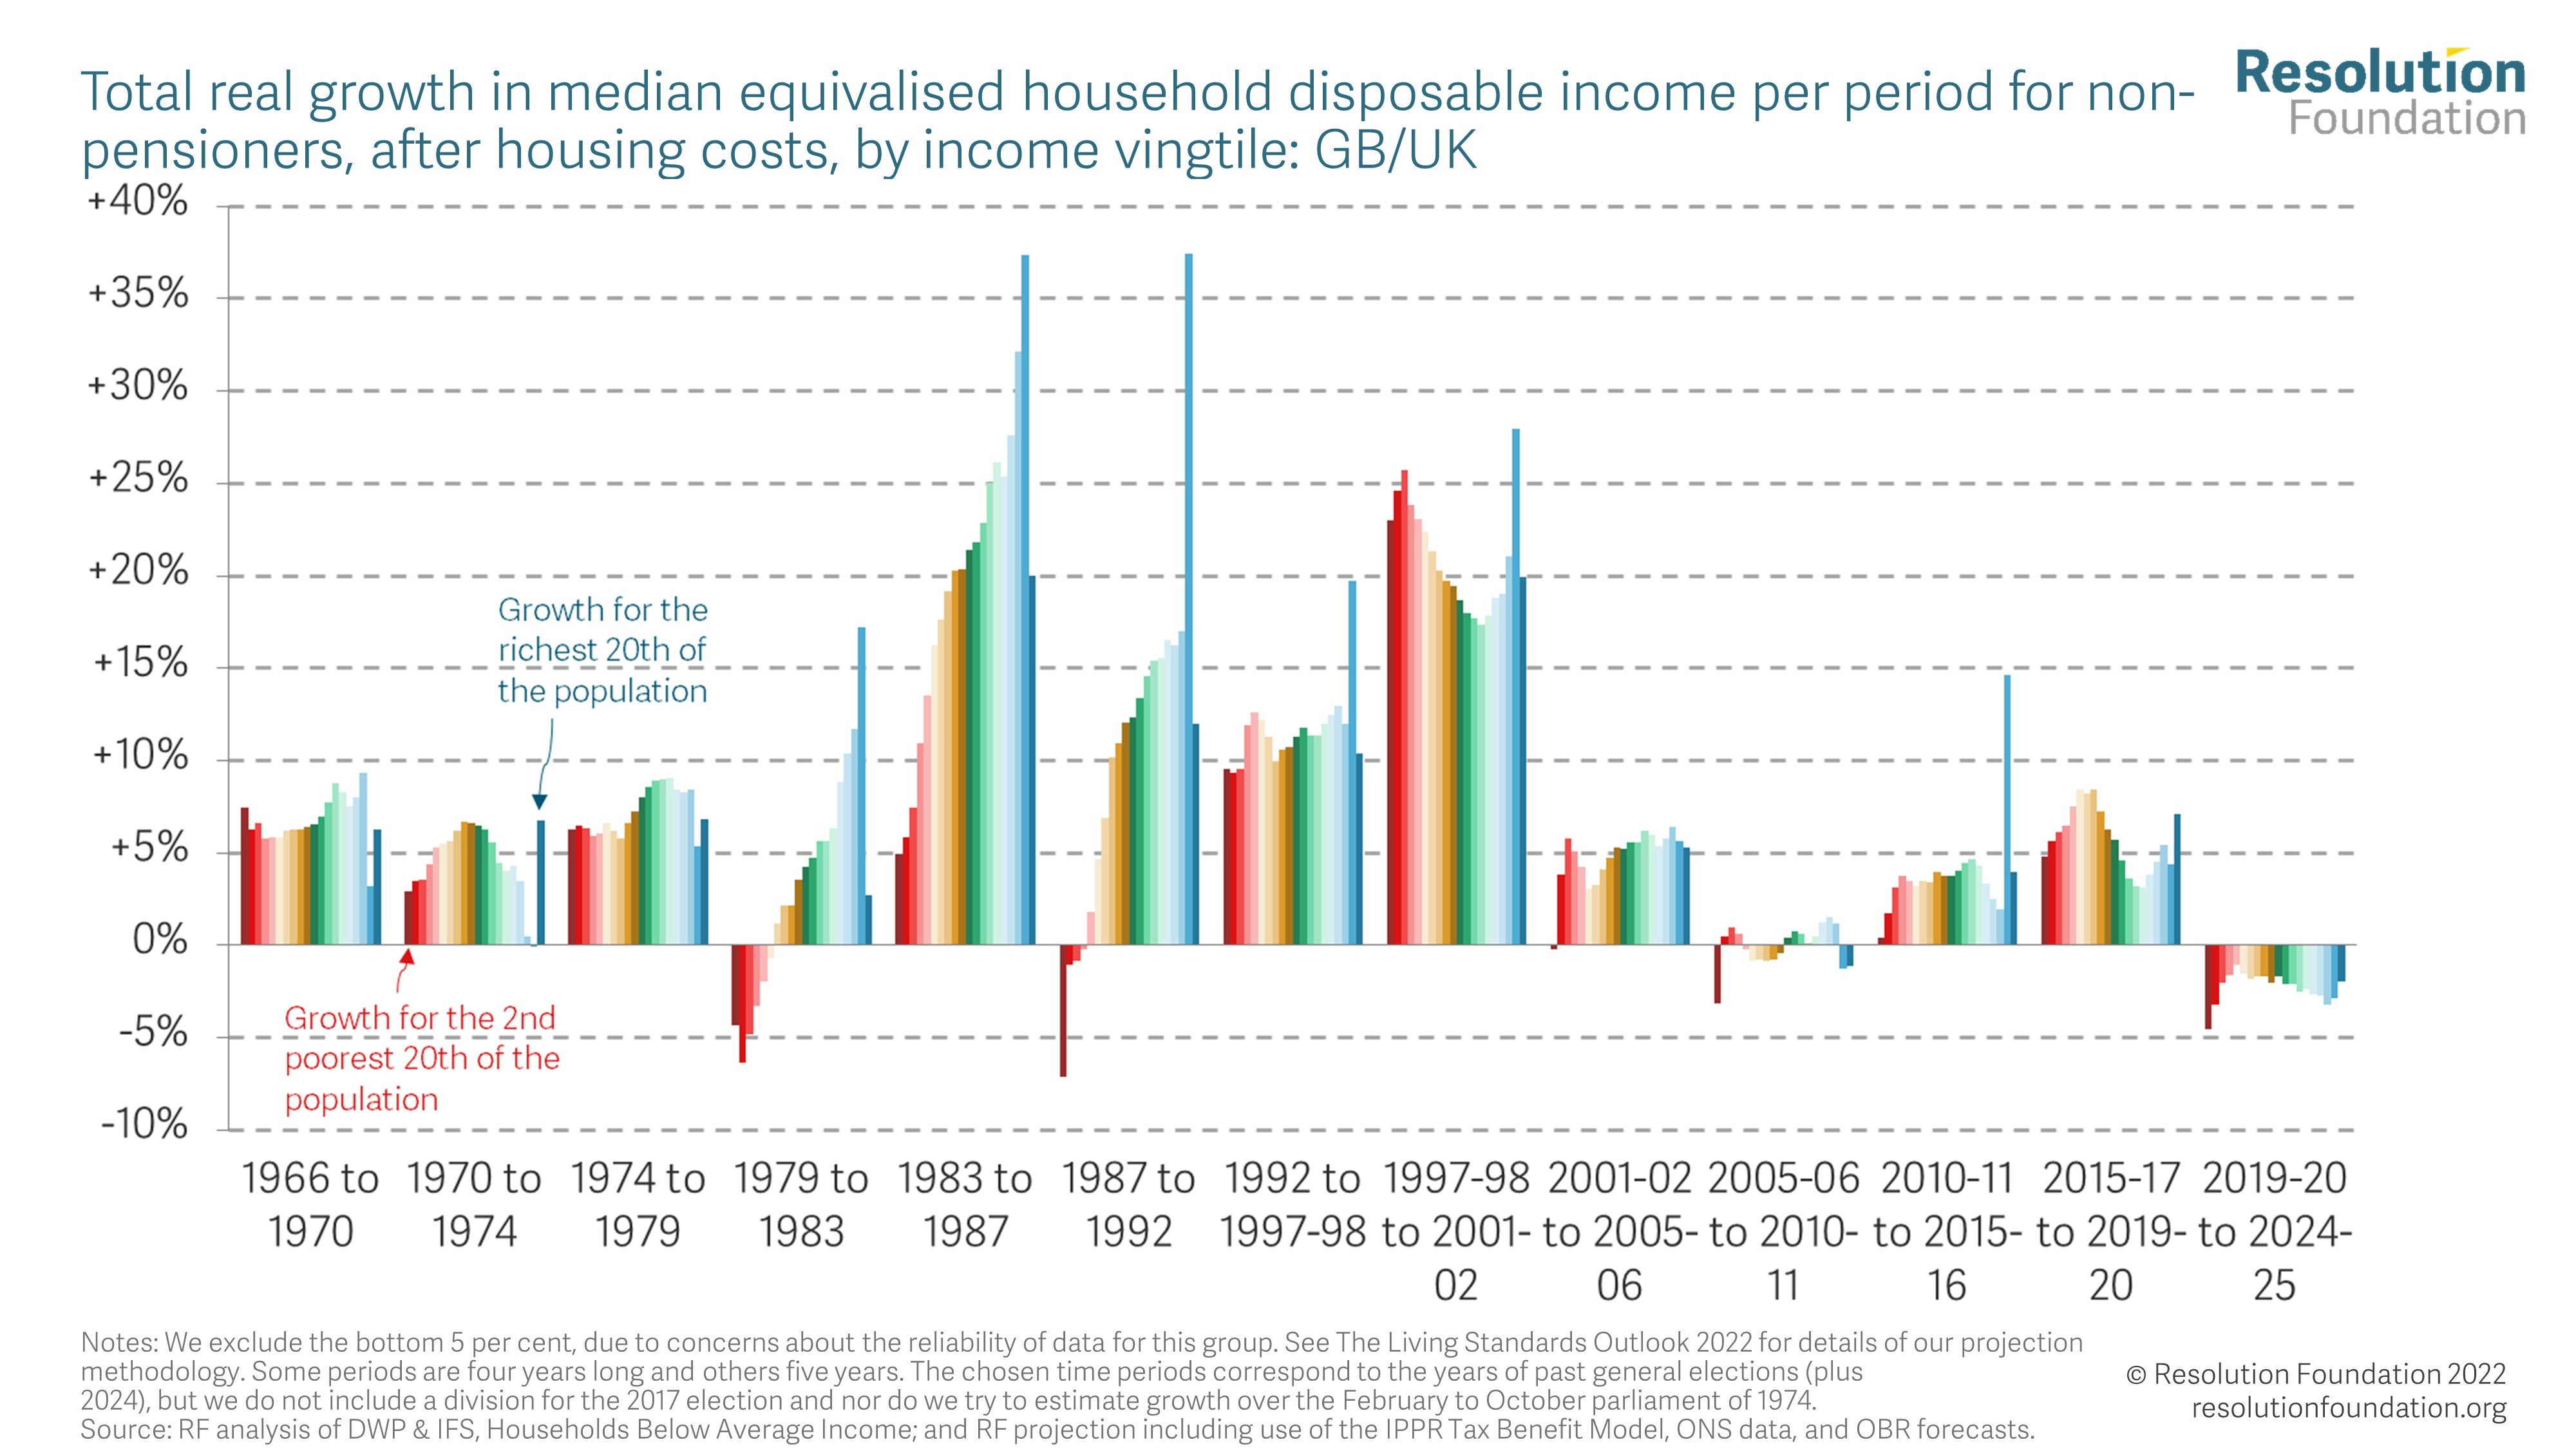 Typical household incomes are set to fall by 2 percent up to 2025